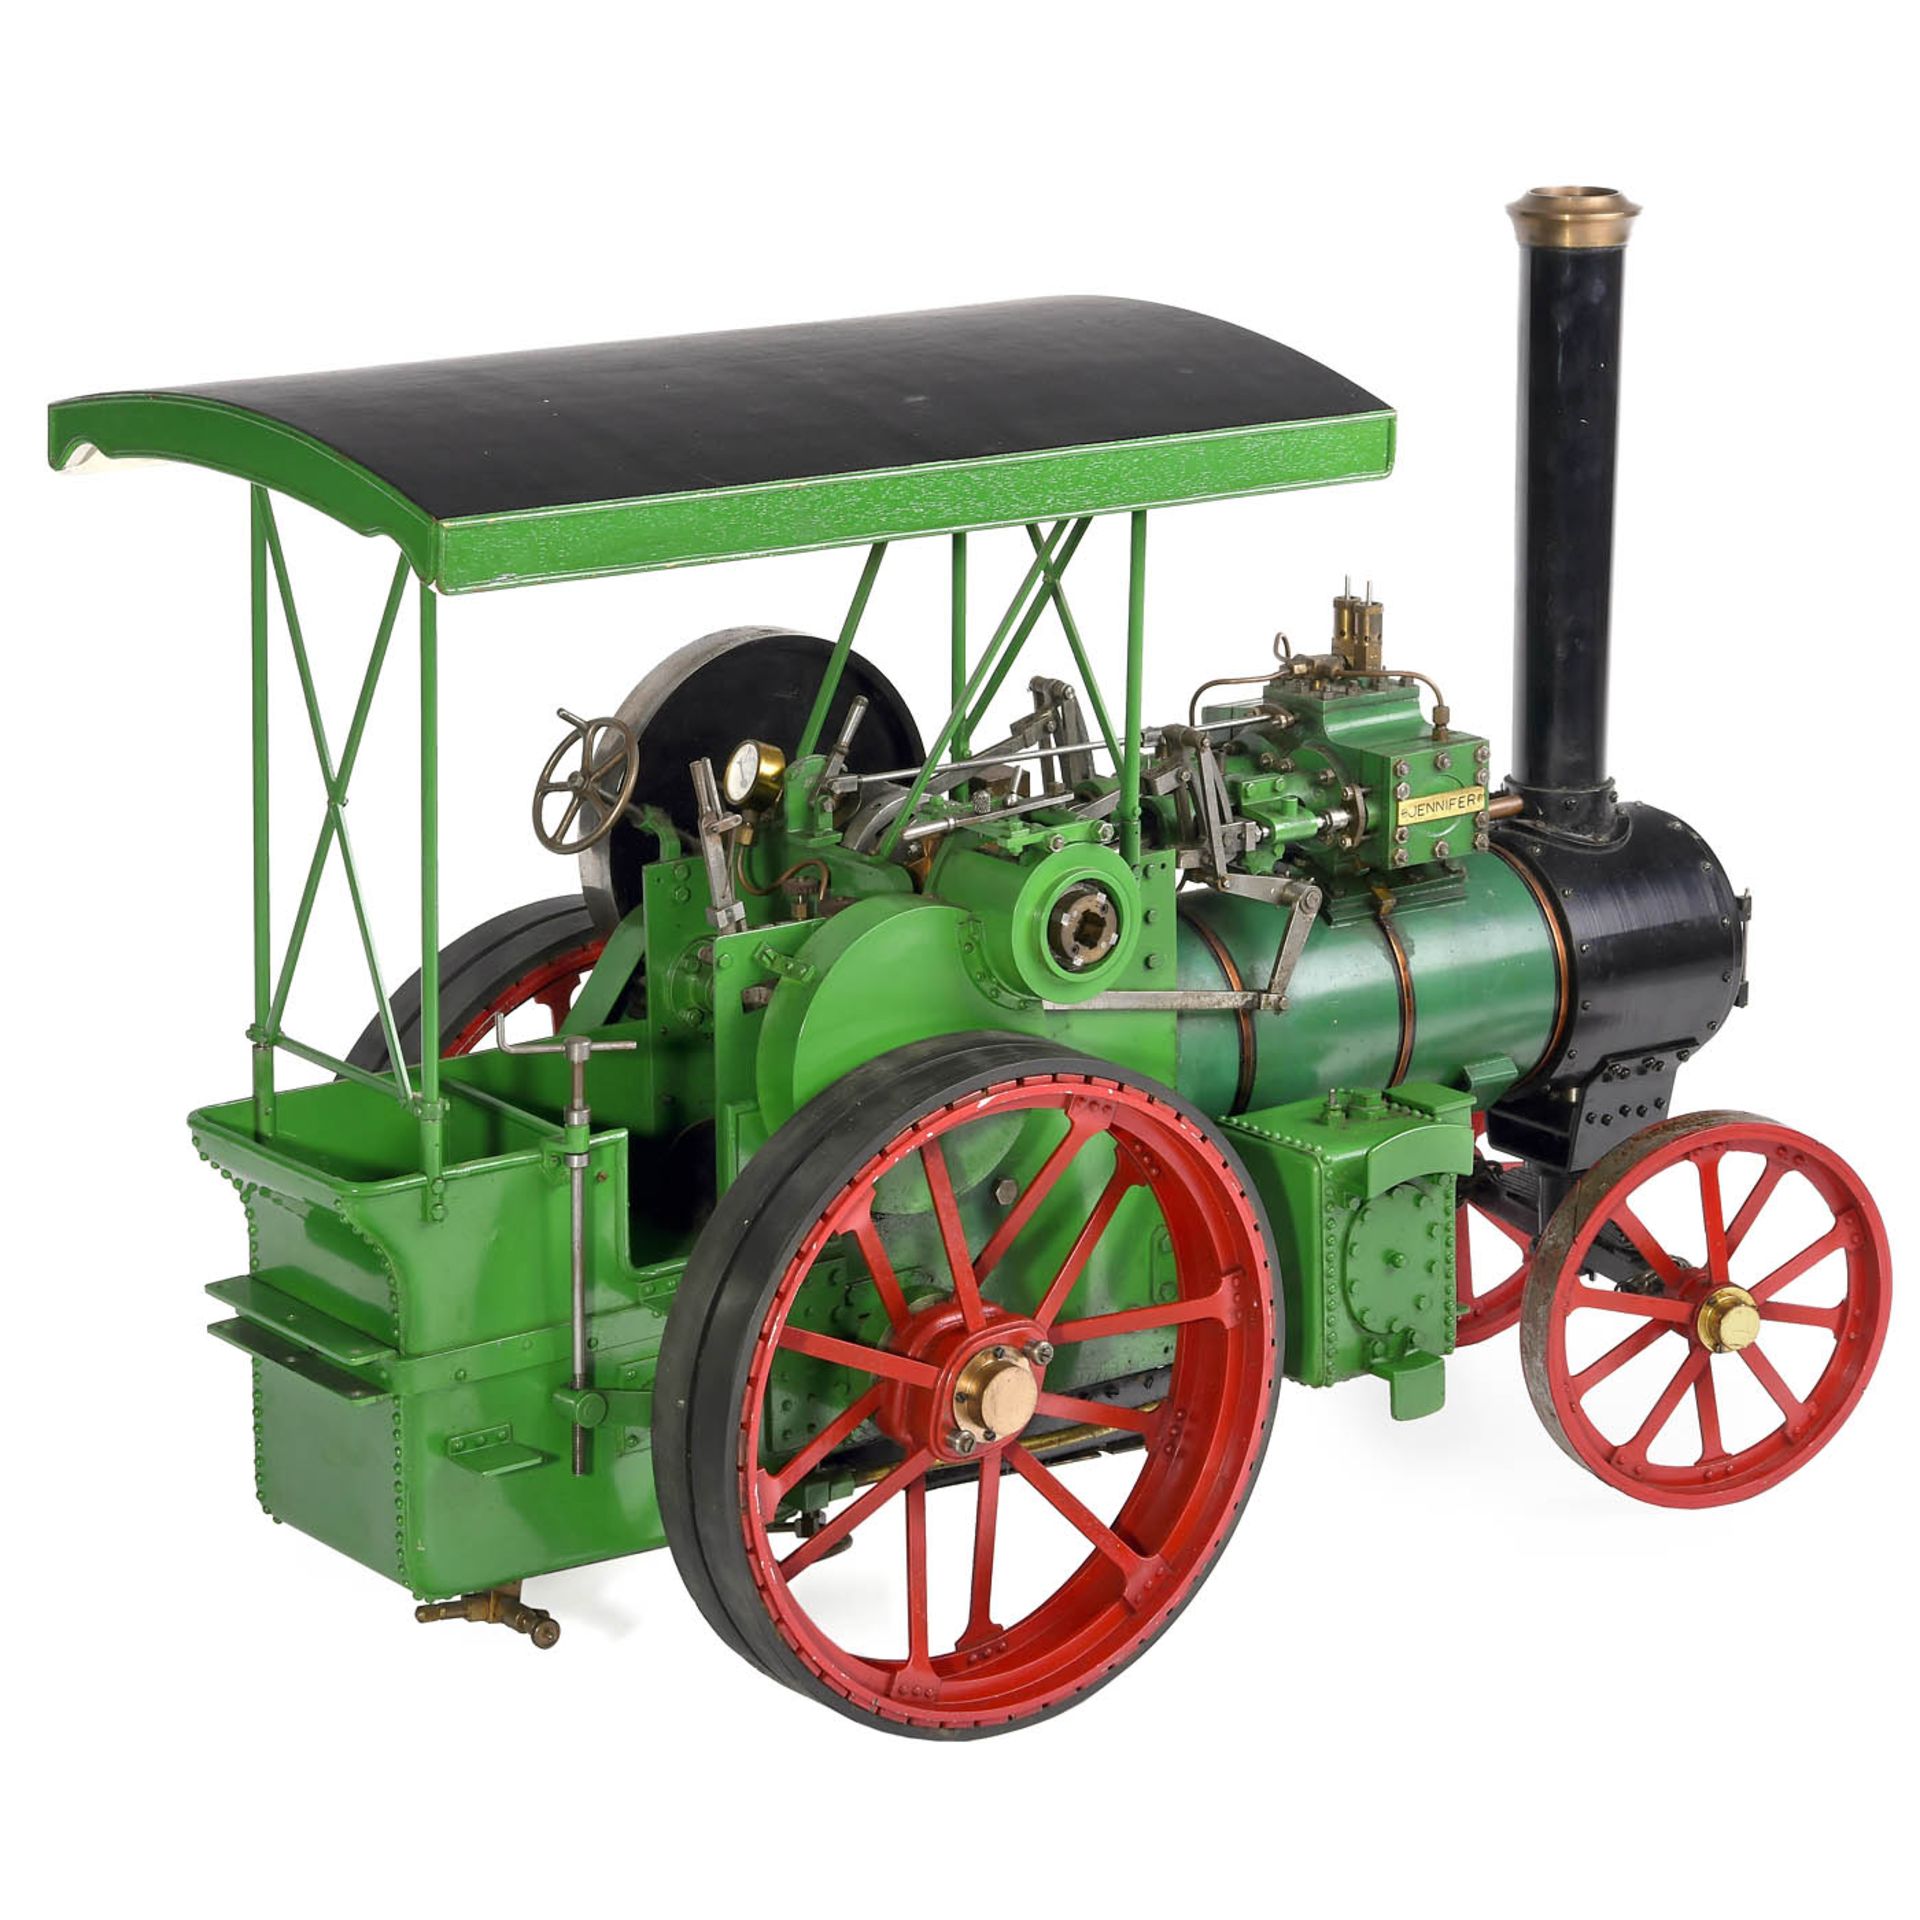 2-inch Scale Model of a Live-Steam Traction Engine "Jenifer", c. 1984 - Image 6 of 10